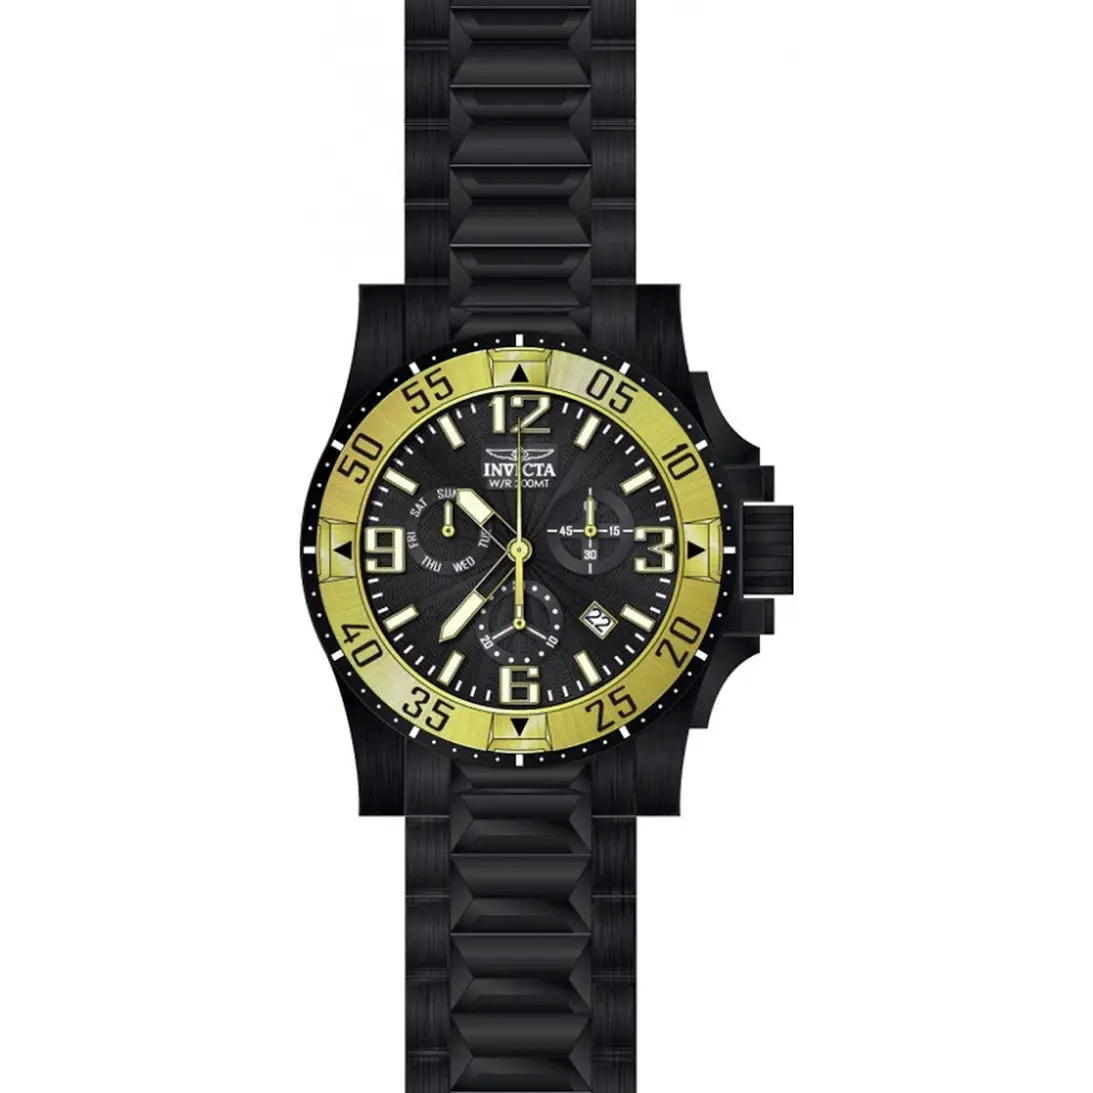 Invicta Men’s Excursion Chronograph Black Stainless Steel